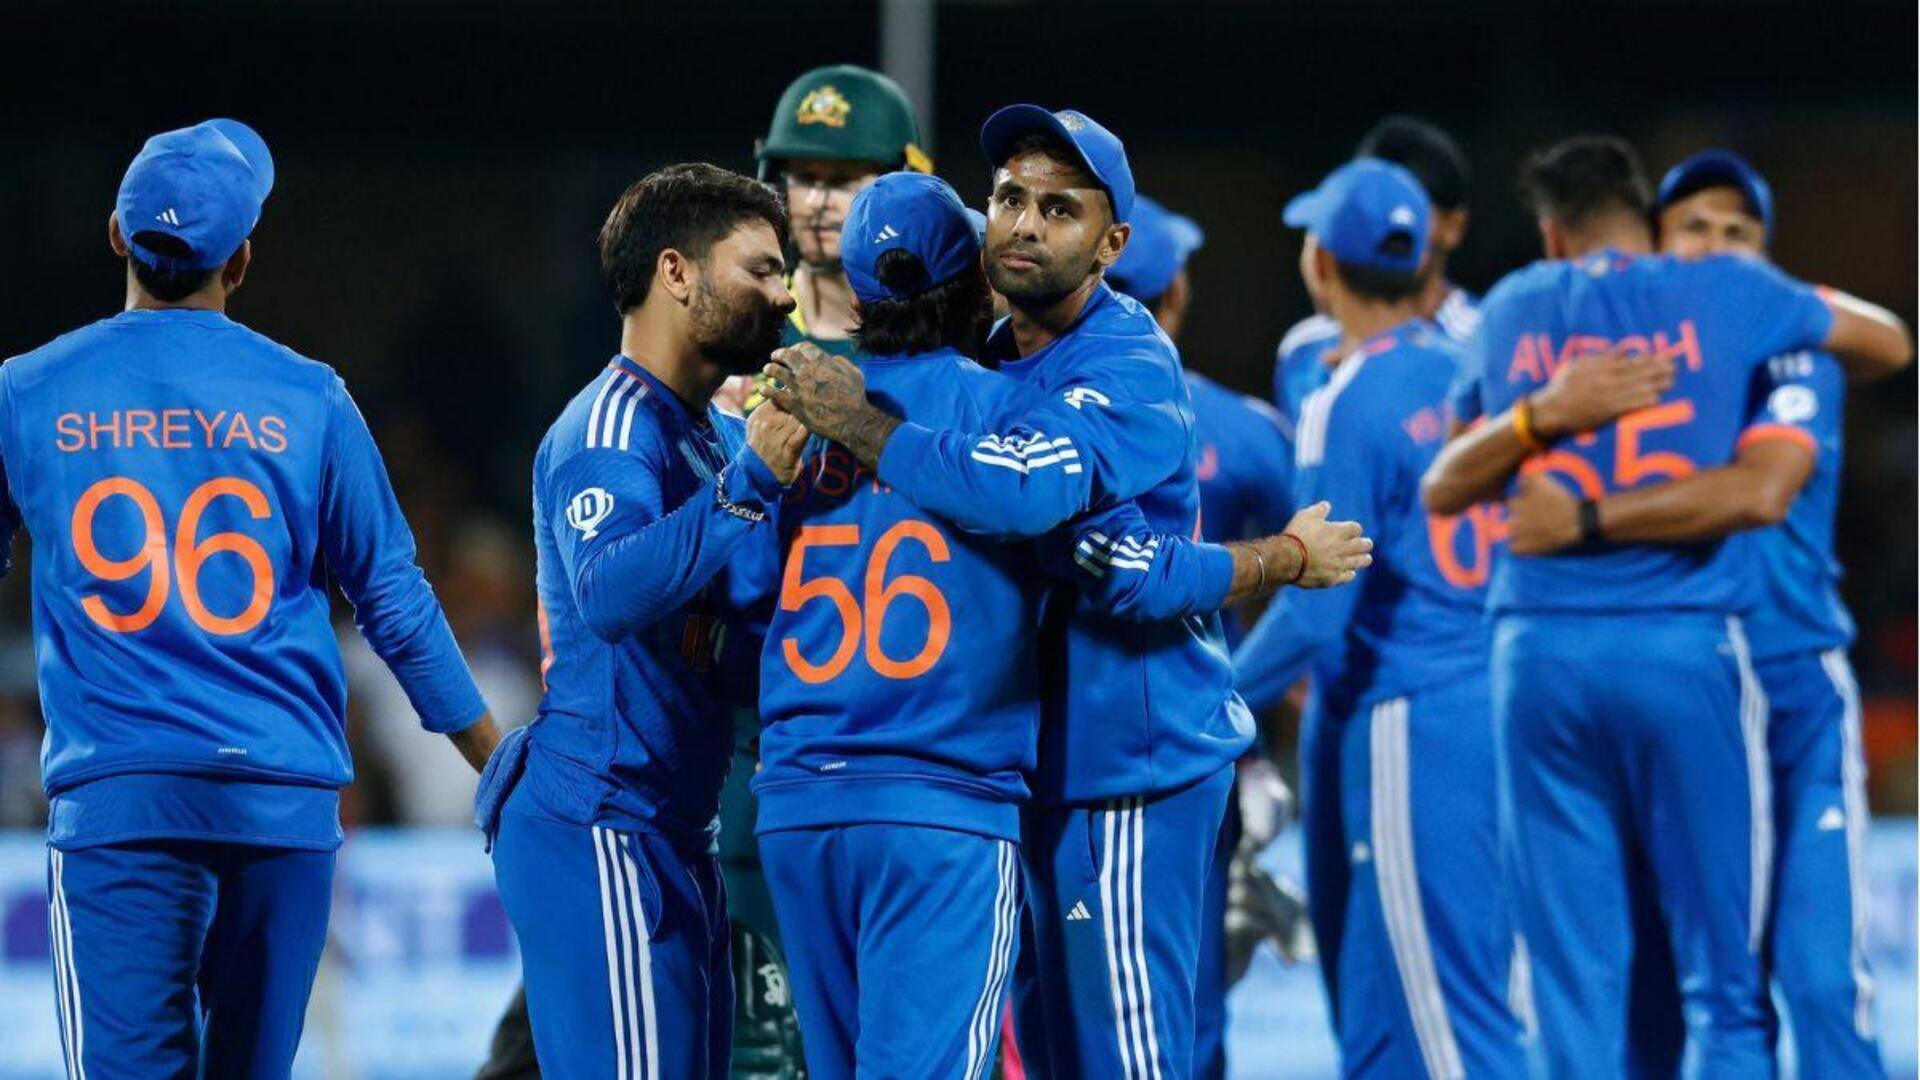 SA vs IND, 2nd T20I: Preview, stats, and Dream11 predictions